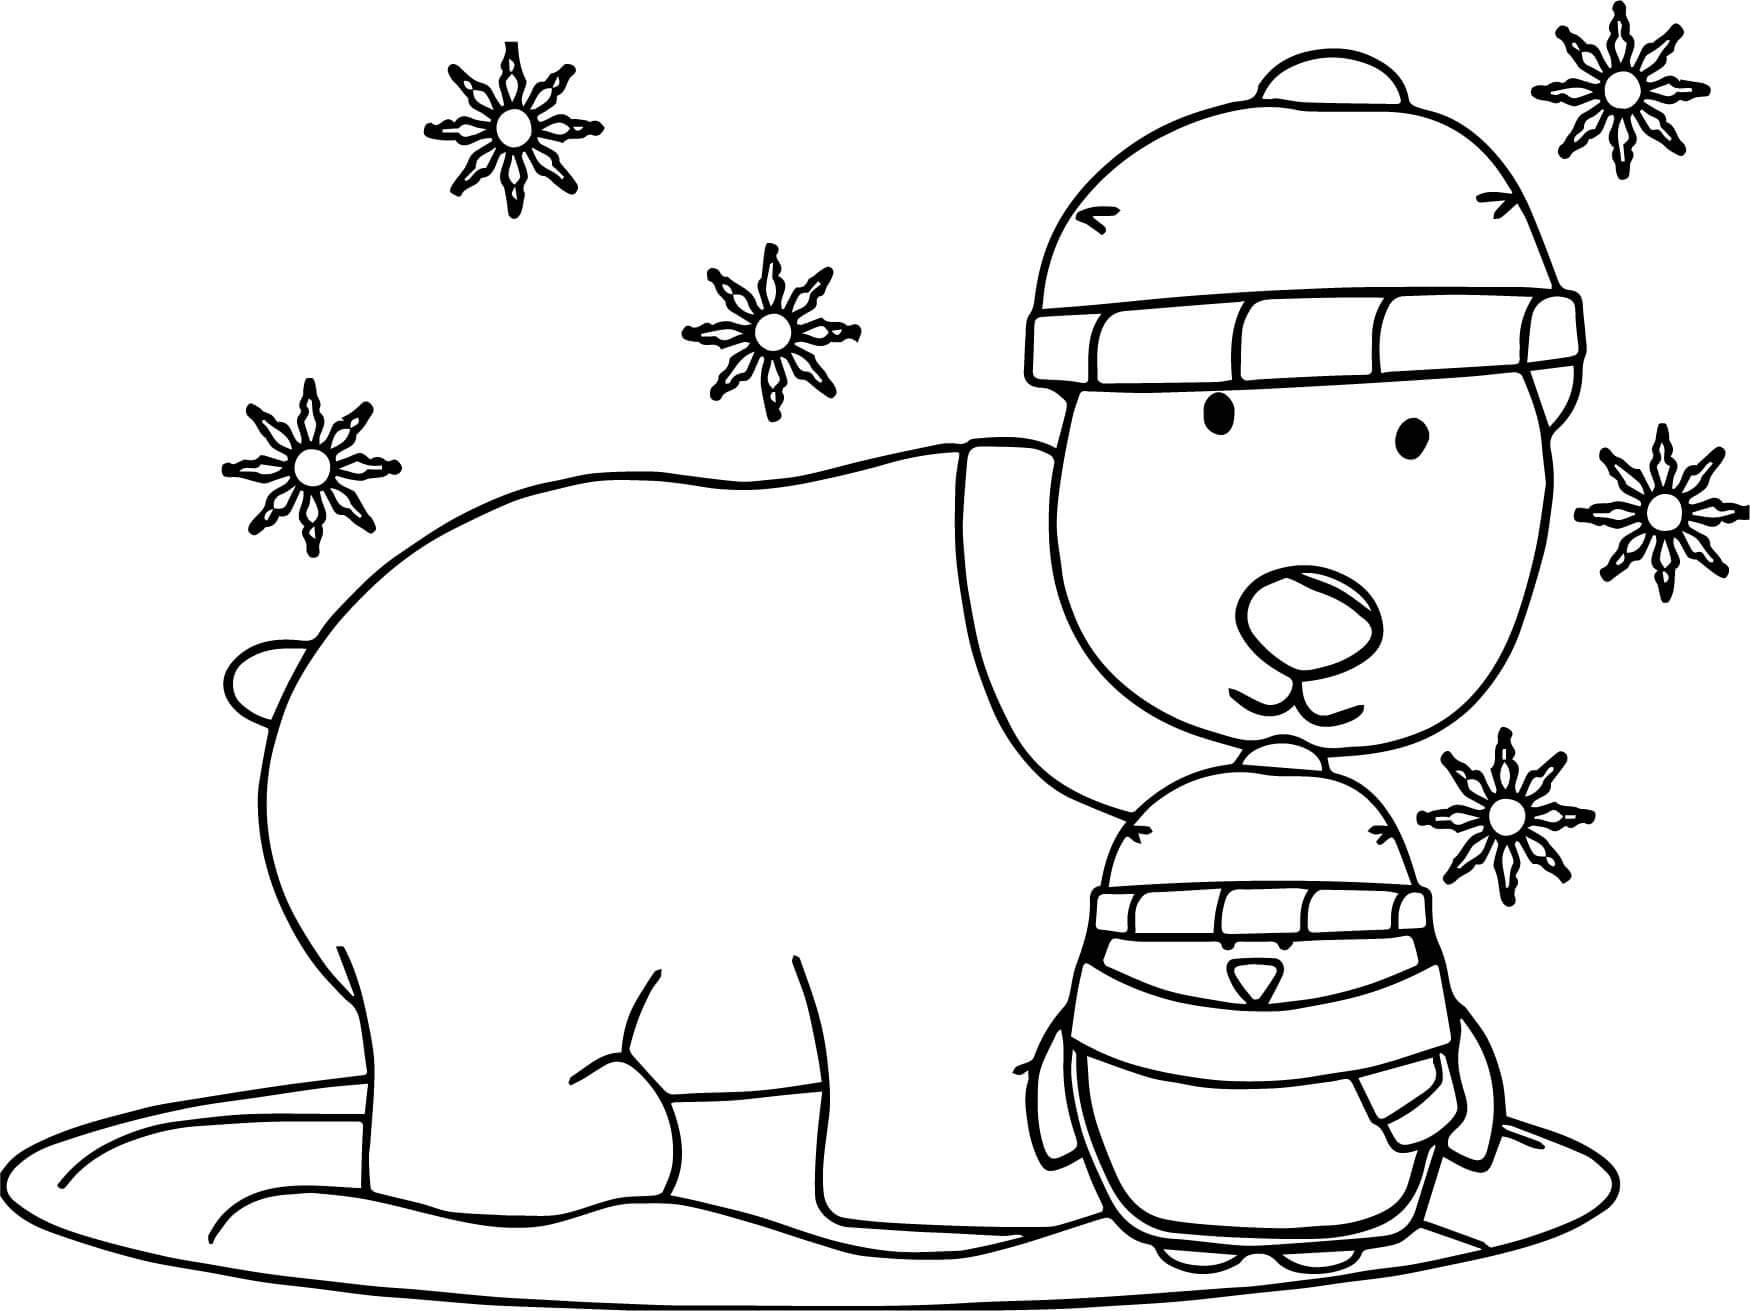 Penguin And Polar Bear In The Snow Coloring Page